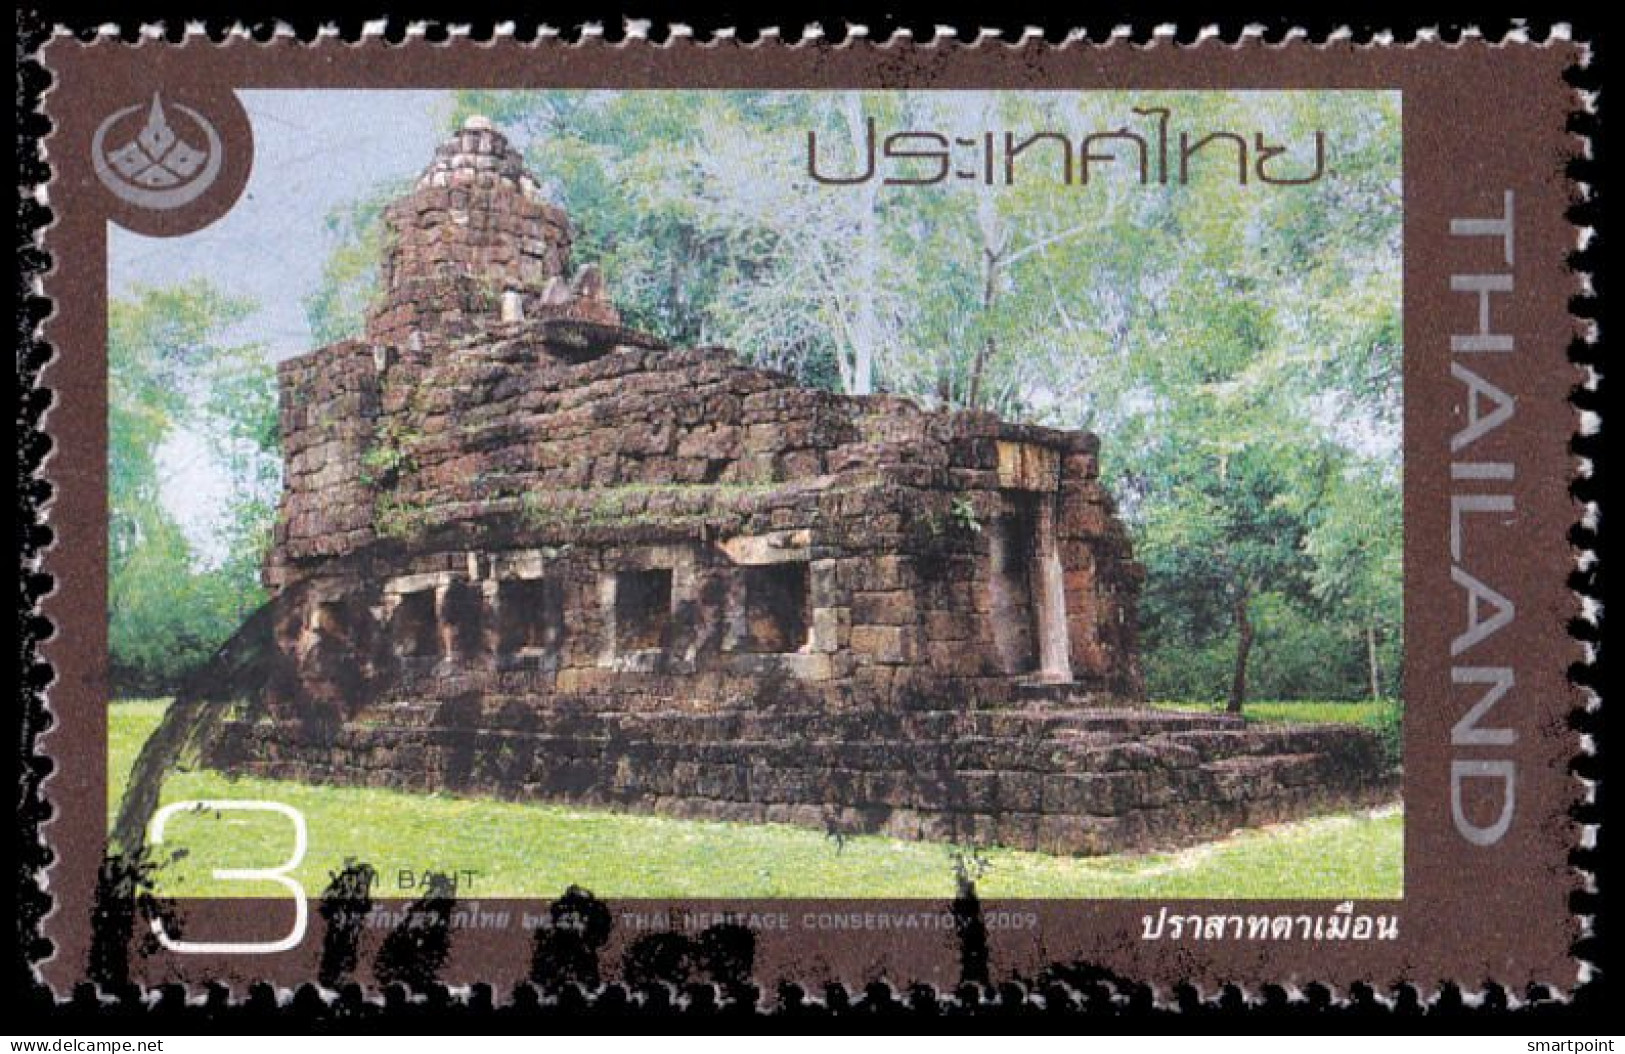 Thailand Stamp 2009 Thai Heritage Conservation Day 3 Baht - Used - Thailand